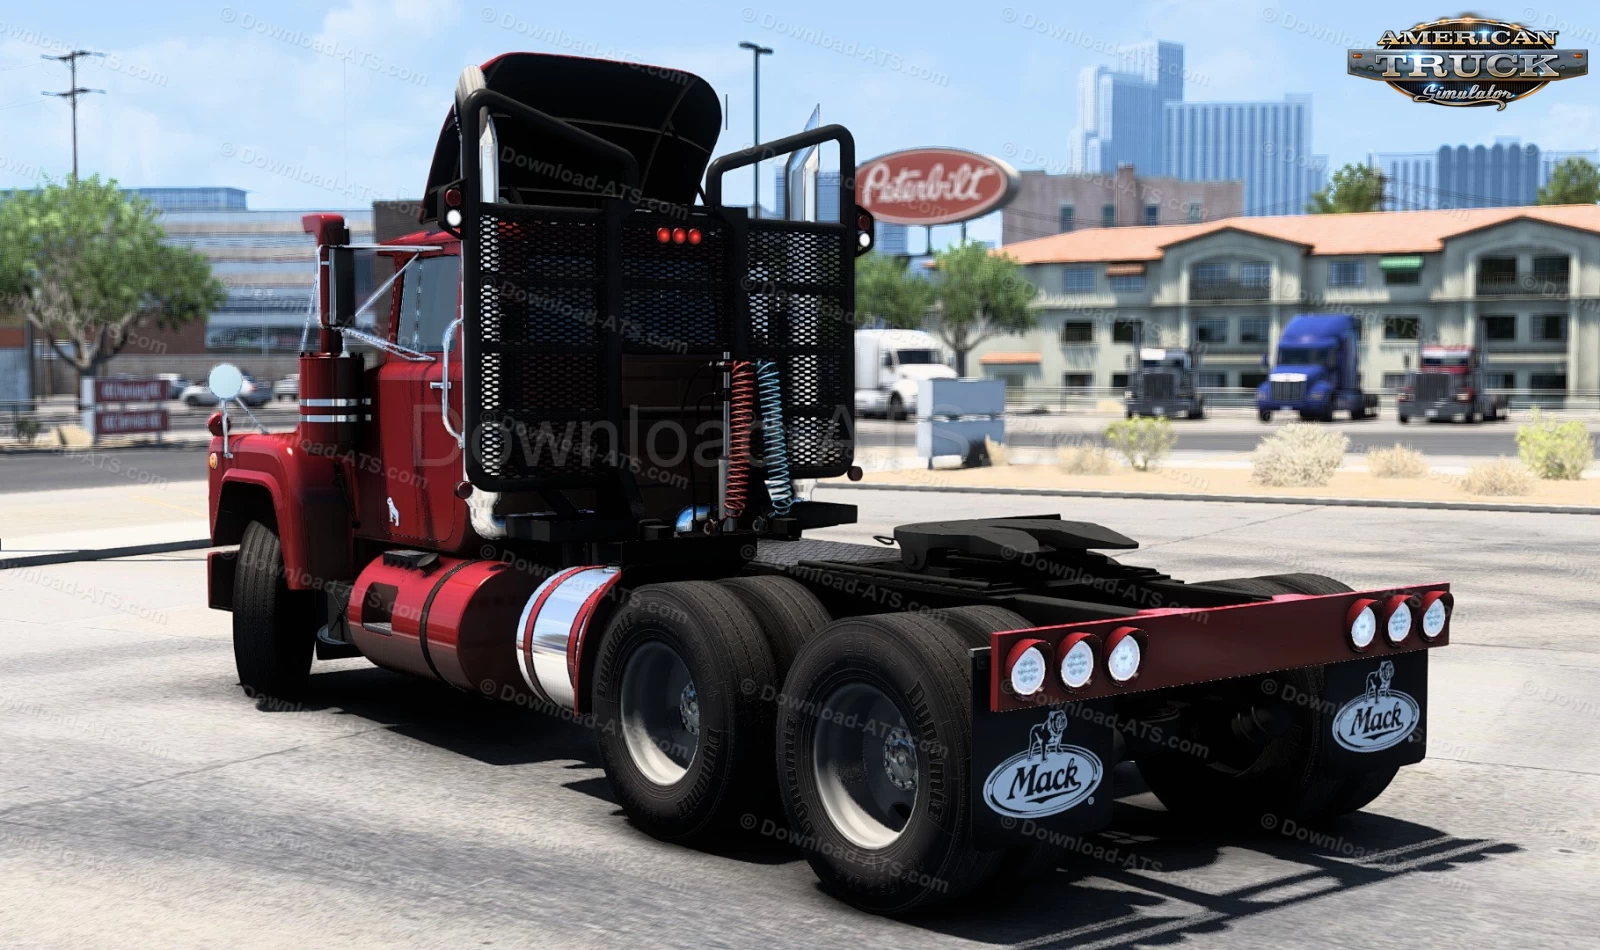 Mack R Series Truck v2.3 by Harven (1.45.x) for ATS